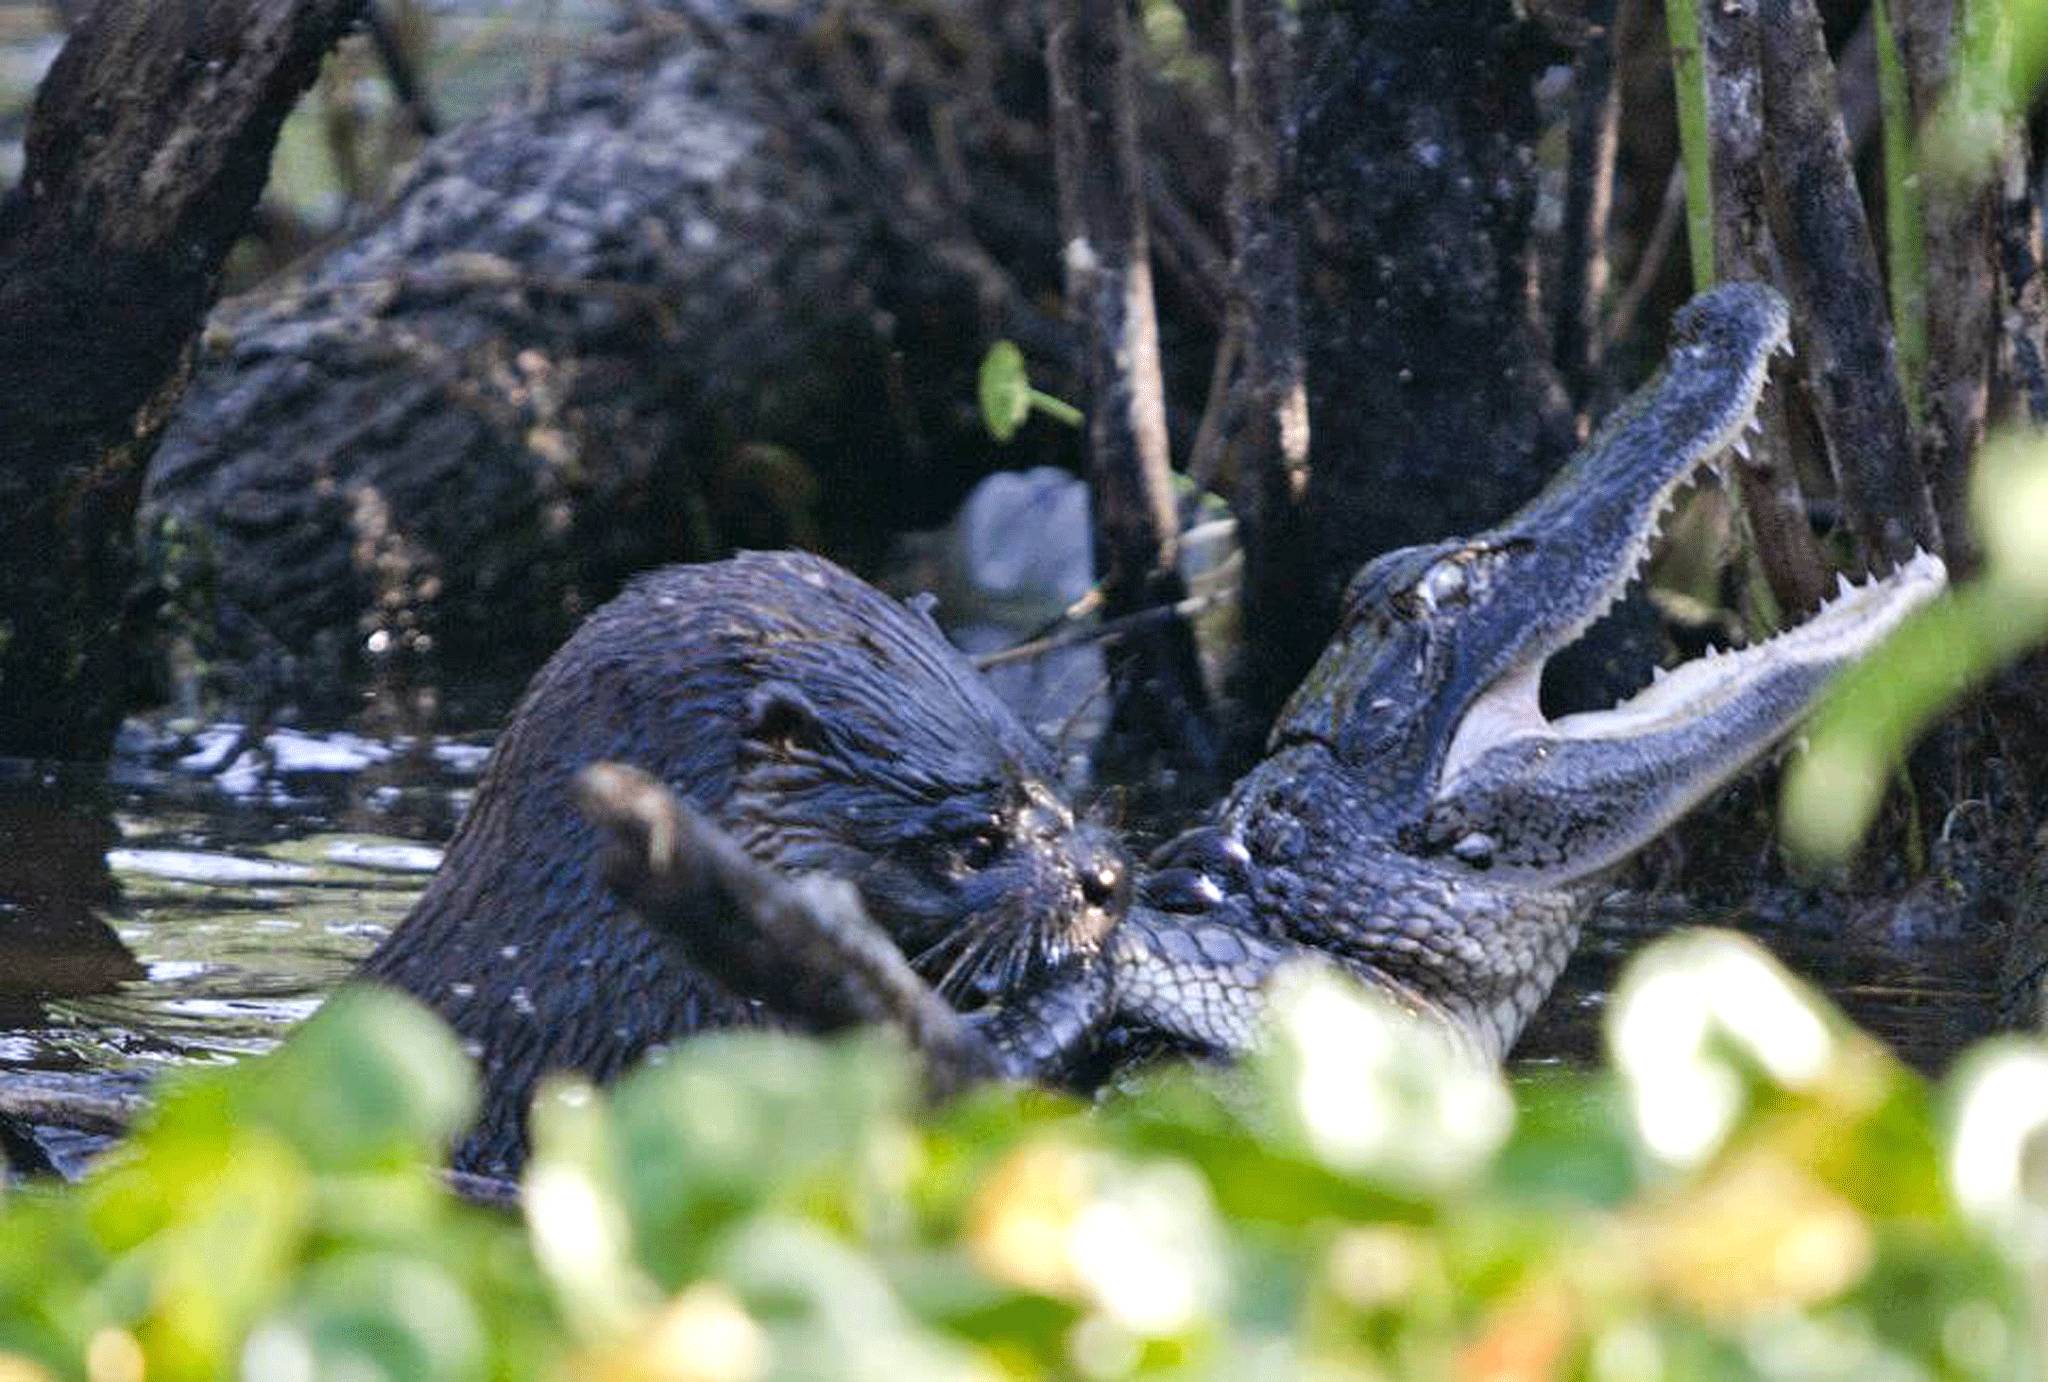 An otter takes on an alligator in De Leon Springs, Florida